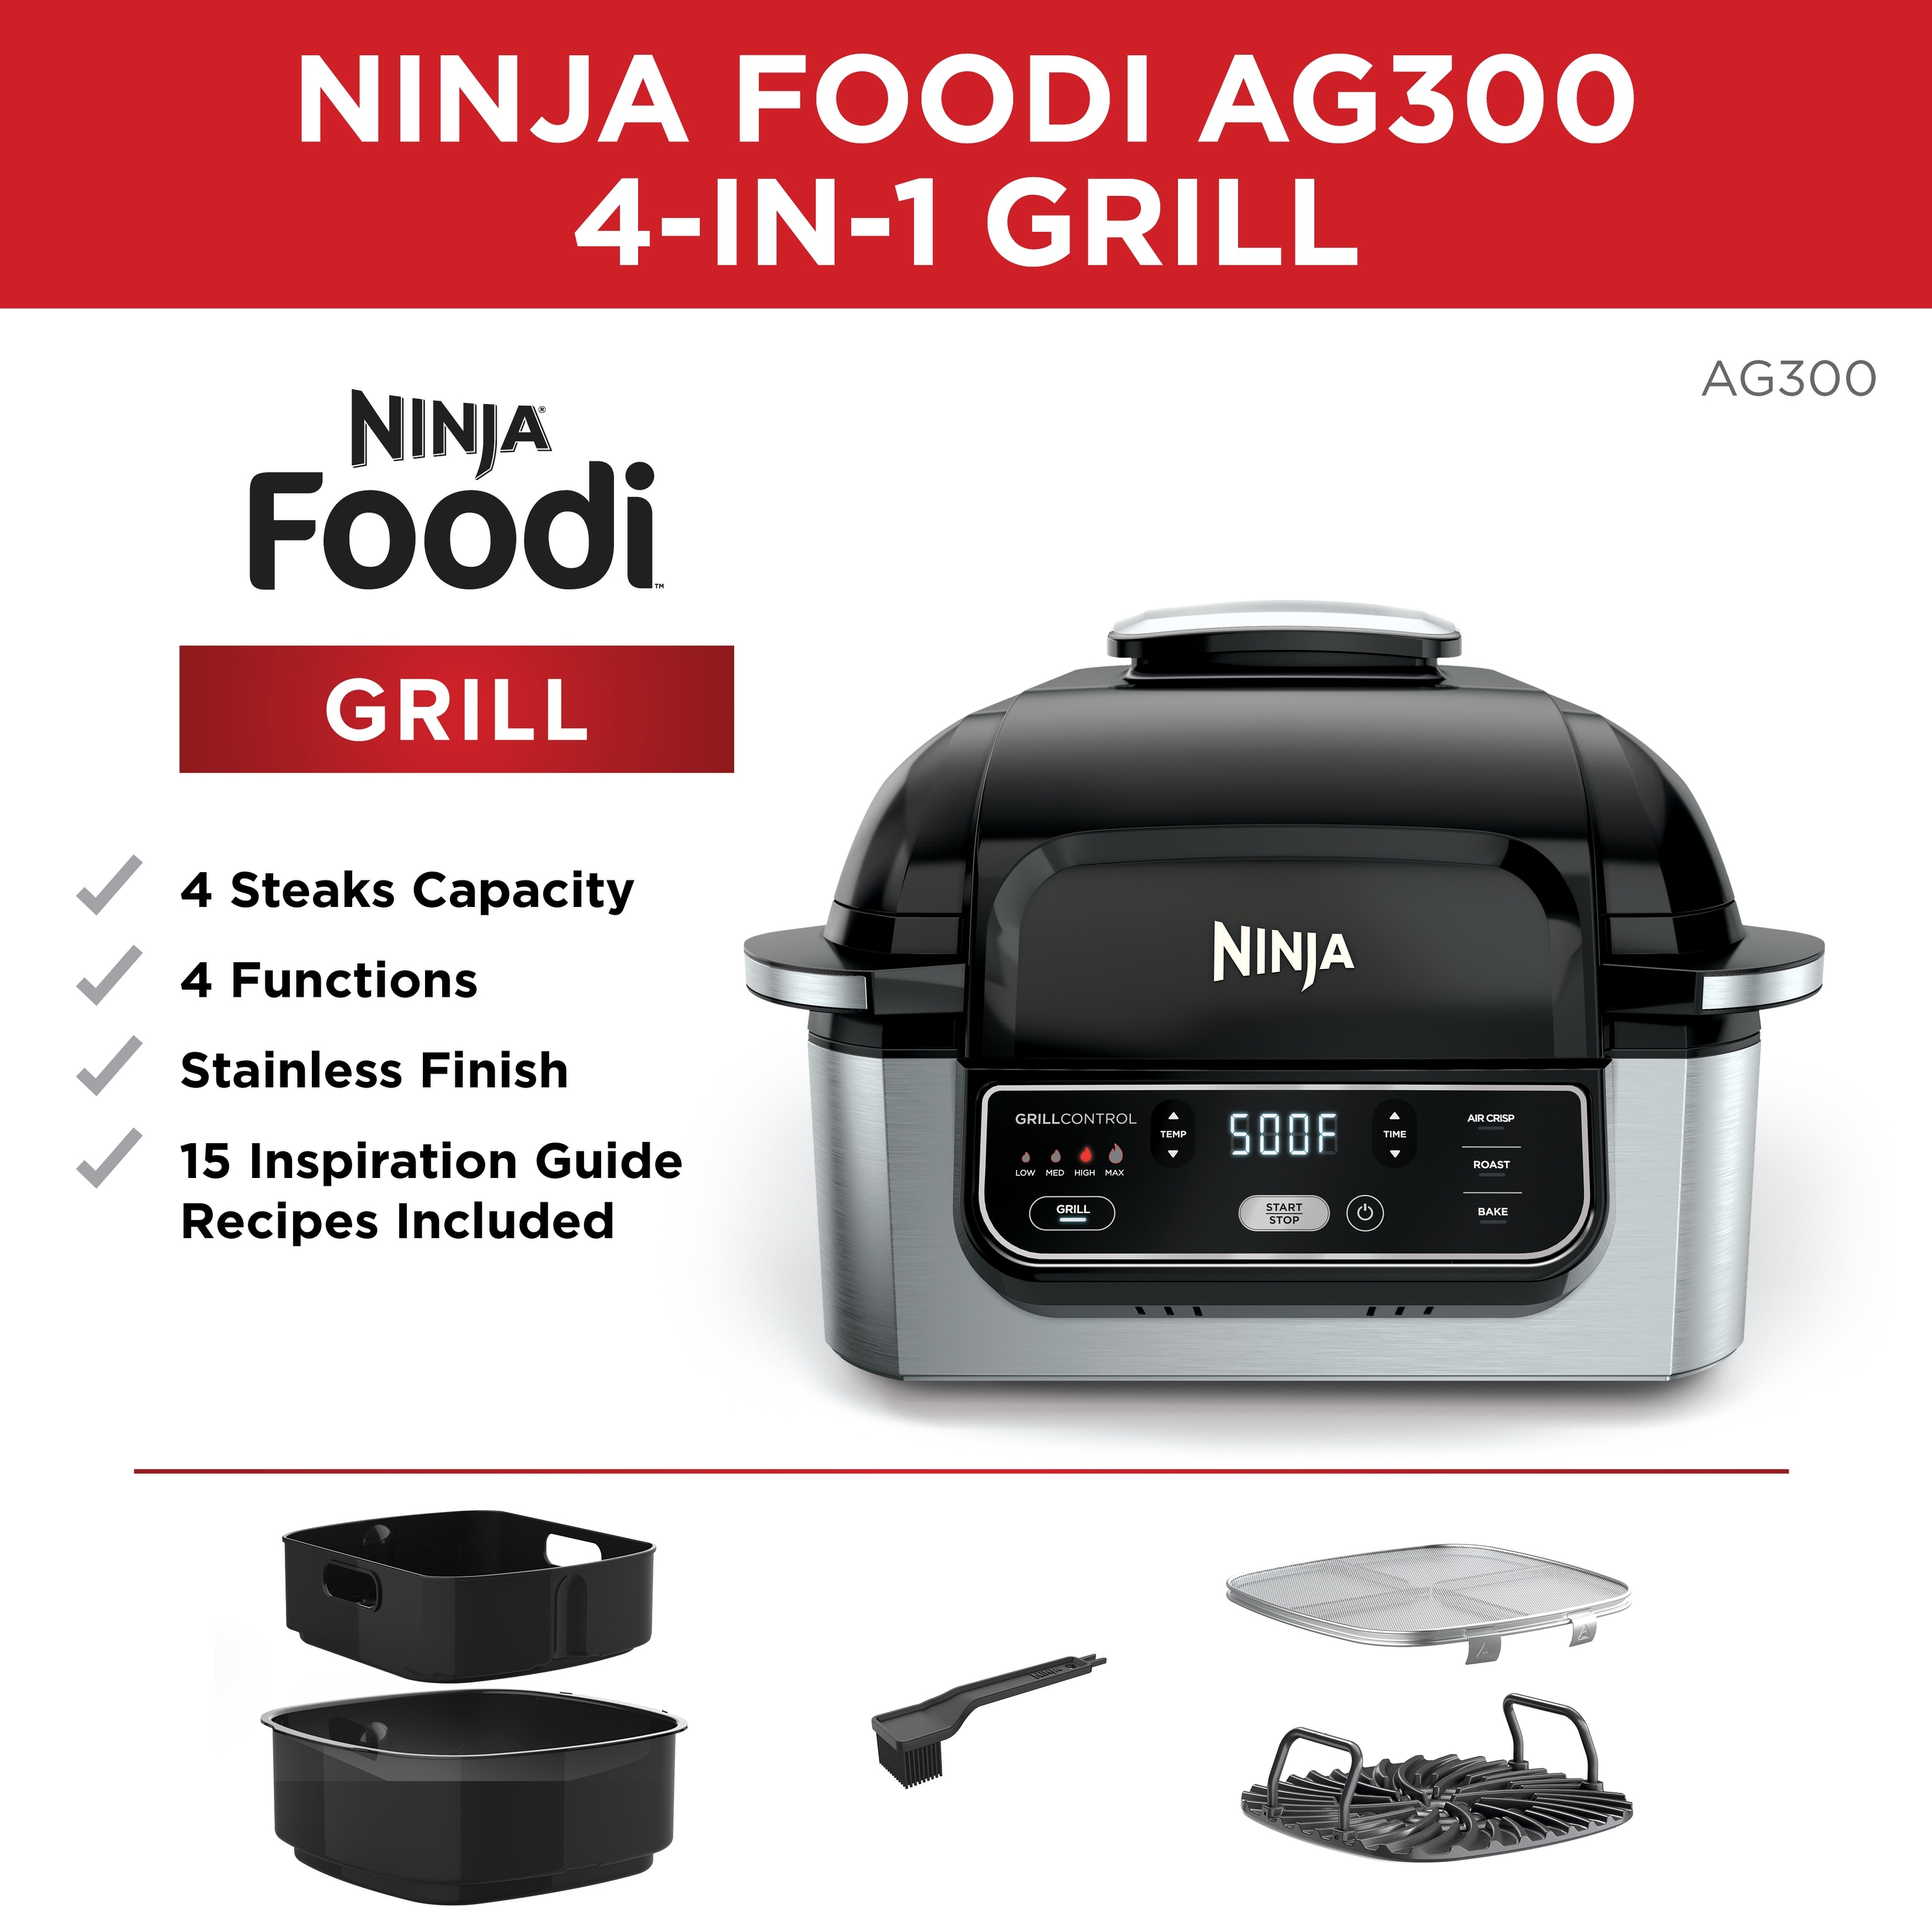 Ninja Foodi 4-in-1 Indoor Grill with 4-qt Air Fryer, Roast, Bake, and  Cyclonic Grilling Technology, Black/Stainless AG300 